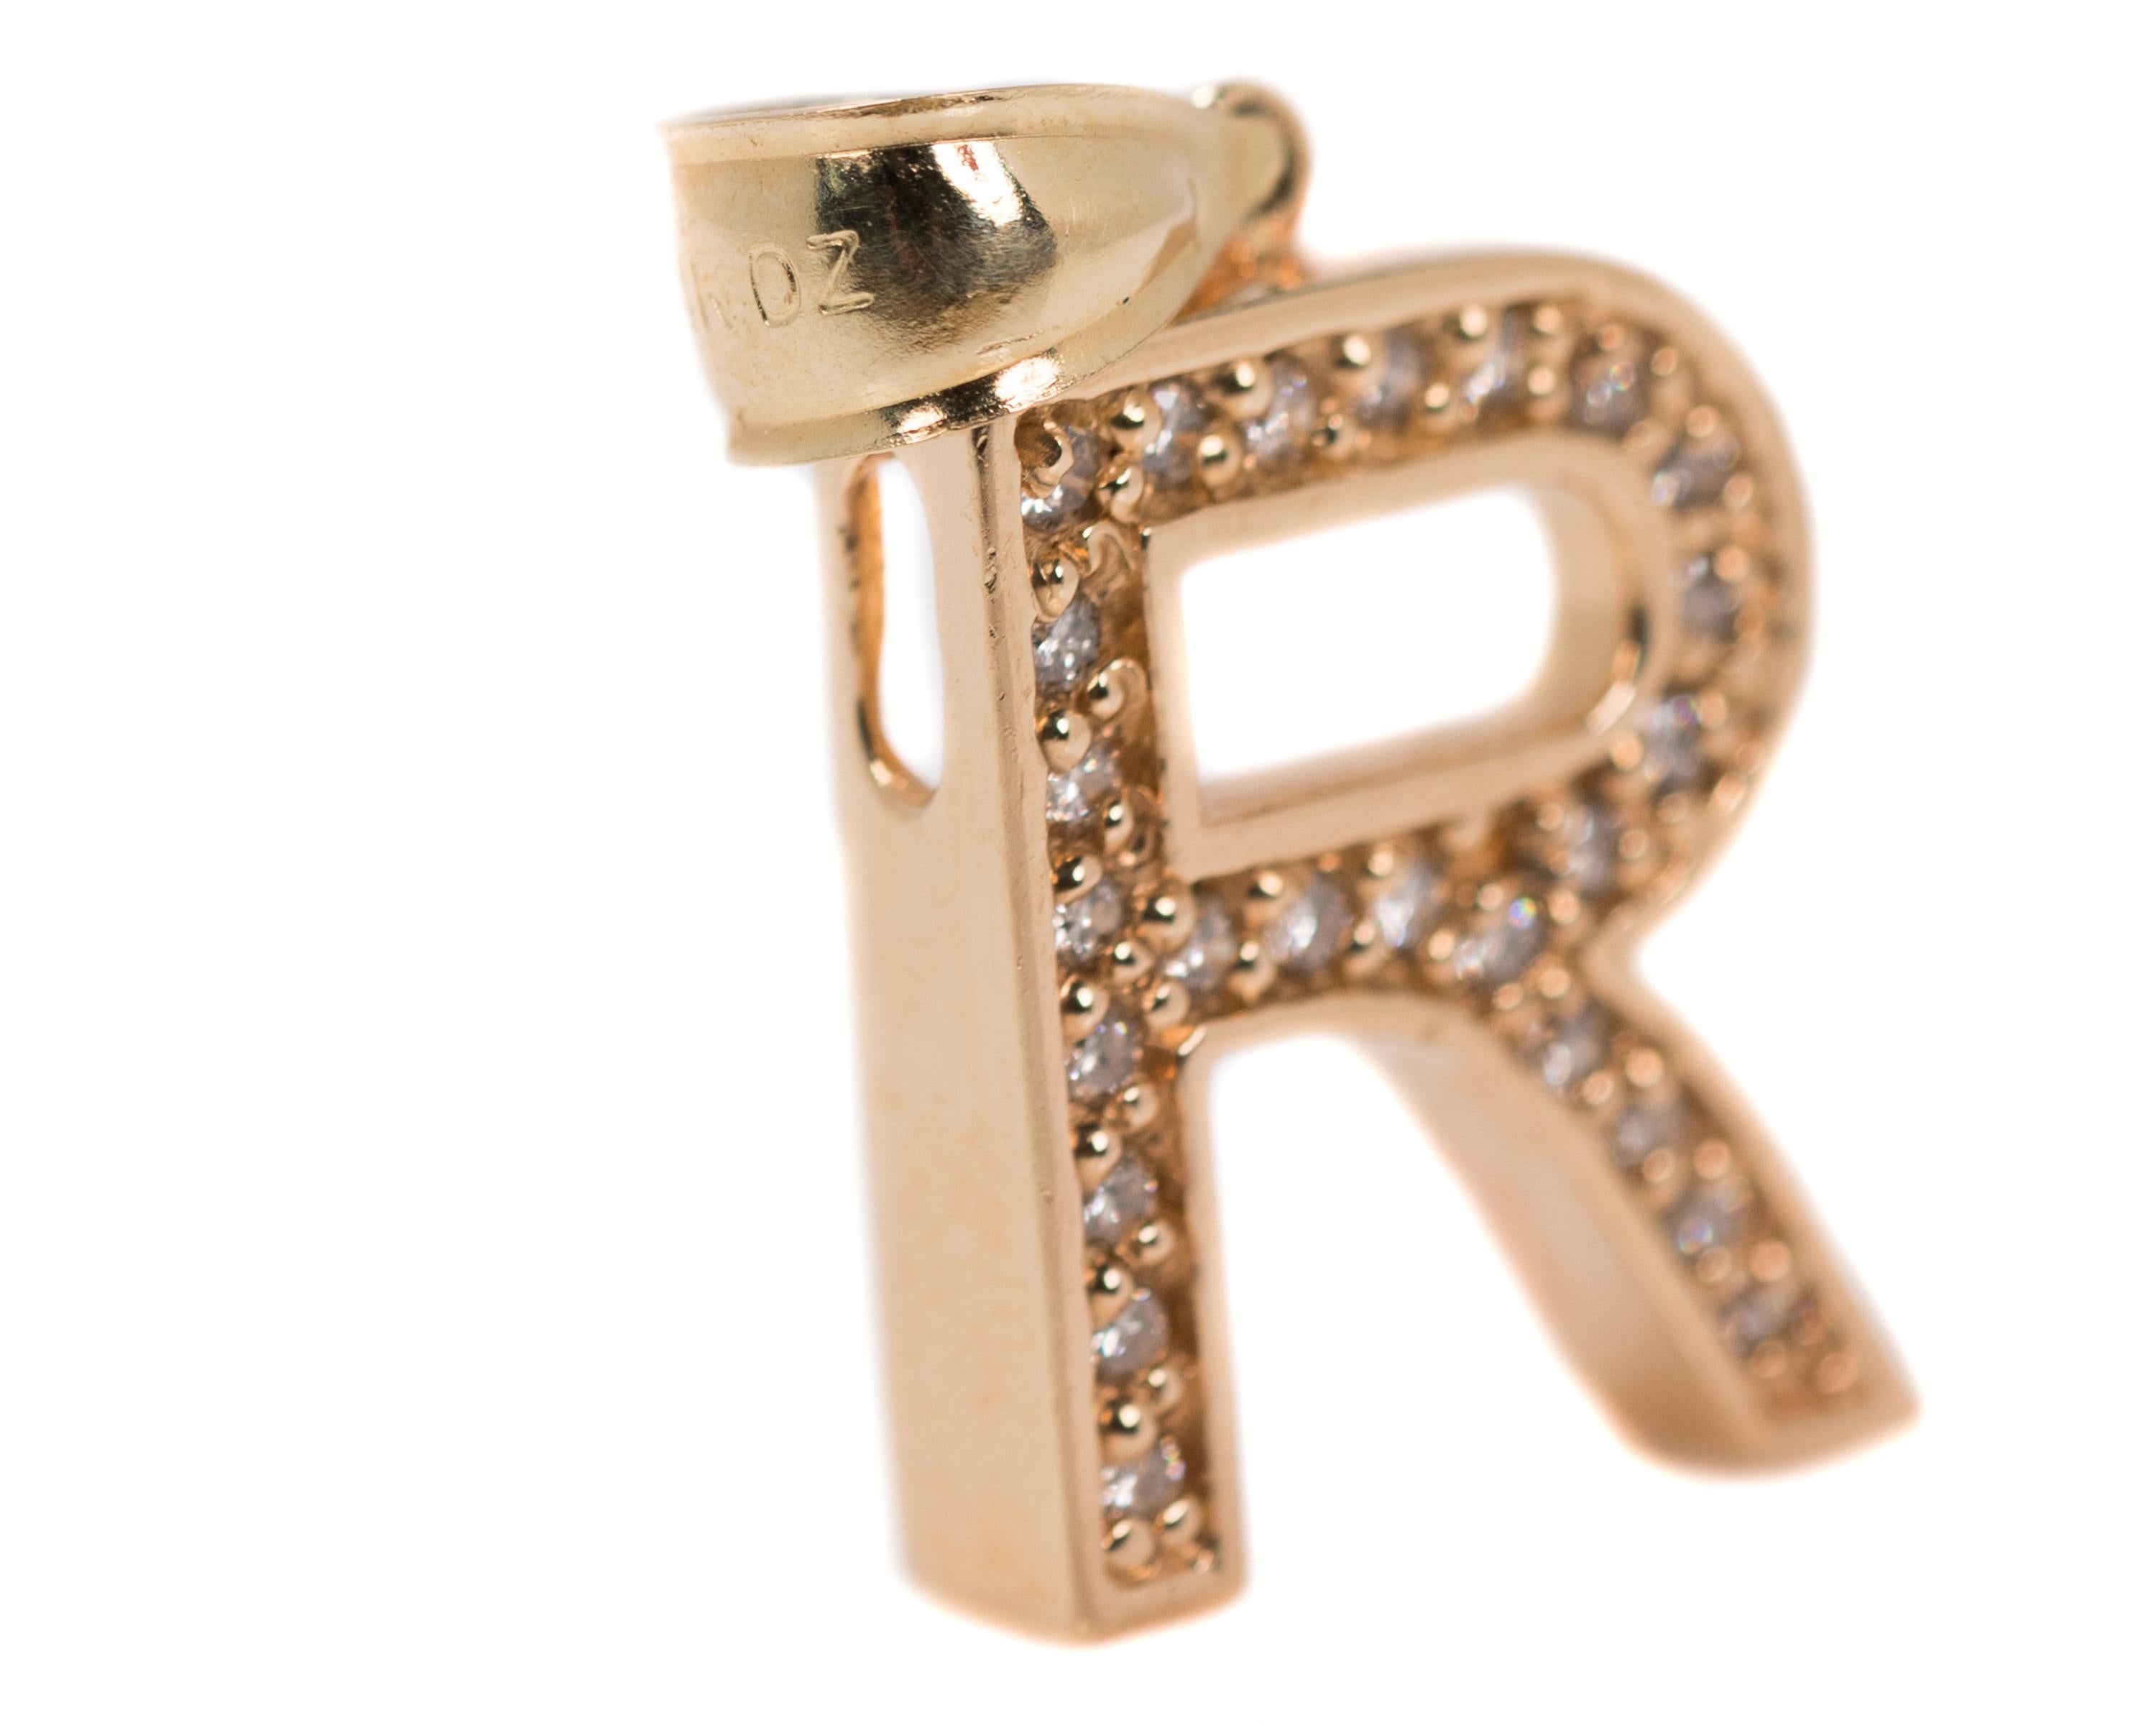 1990s Initial R Pendant Charm - 14 Karat Yellow Gold, Diamonds

Features:
0.33 carats Diamonds
14 Karat Yellow Gold Setting
Fixed Bail
Openings on upper and side edges of the upper corner for a chain or jump ring to wear as a charm
Charm measures 24